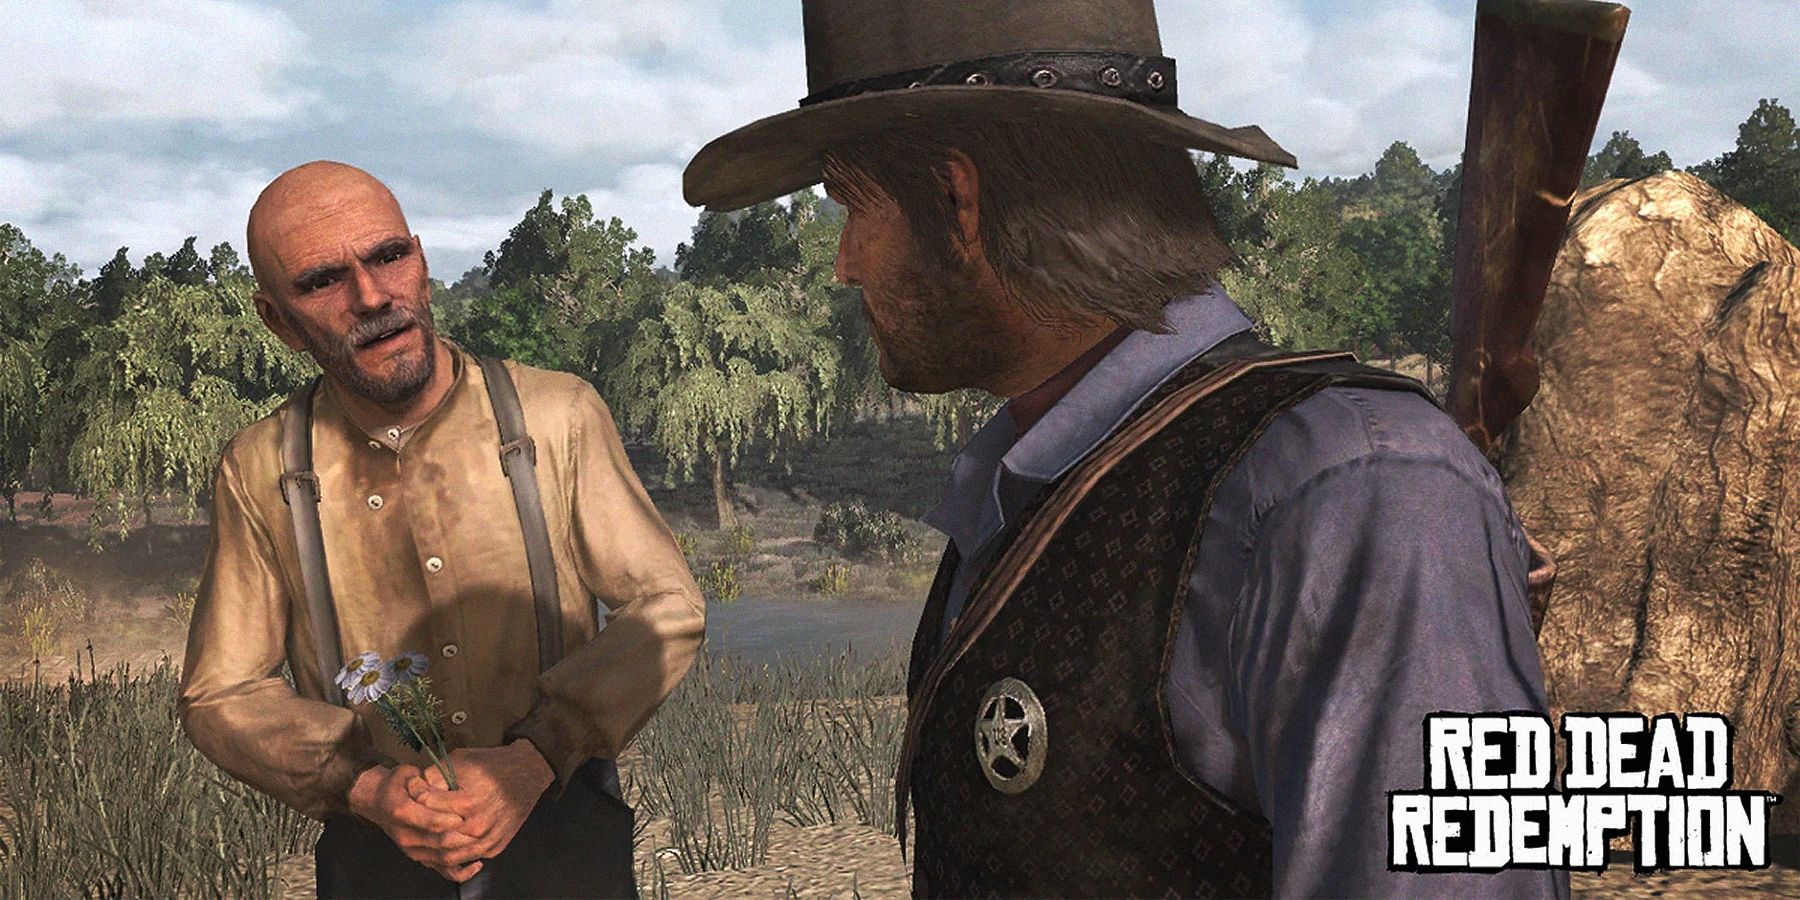 red dead redemption player makes creepy discovery in flowers for a lady quest